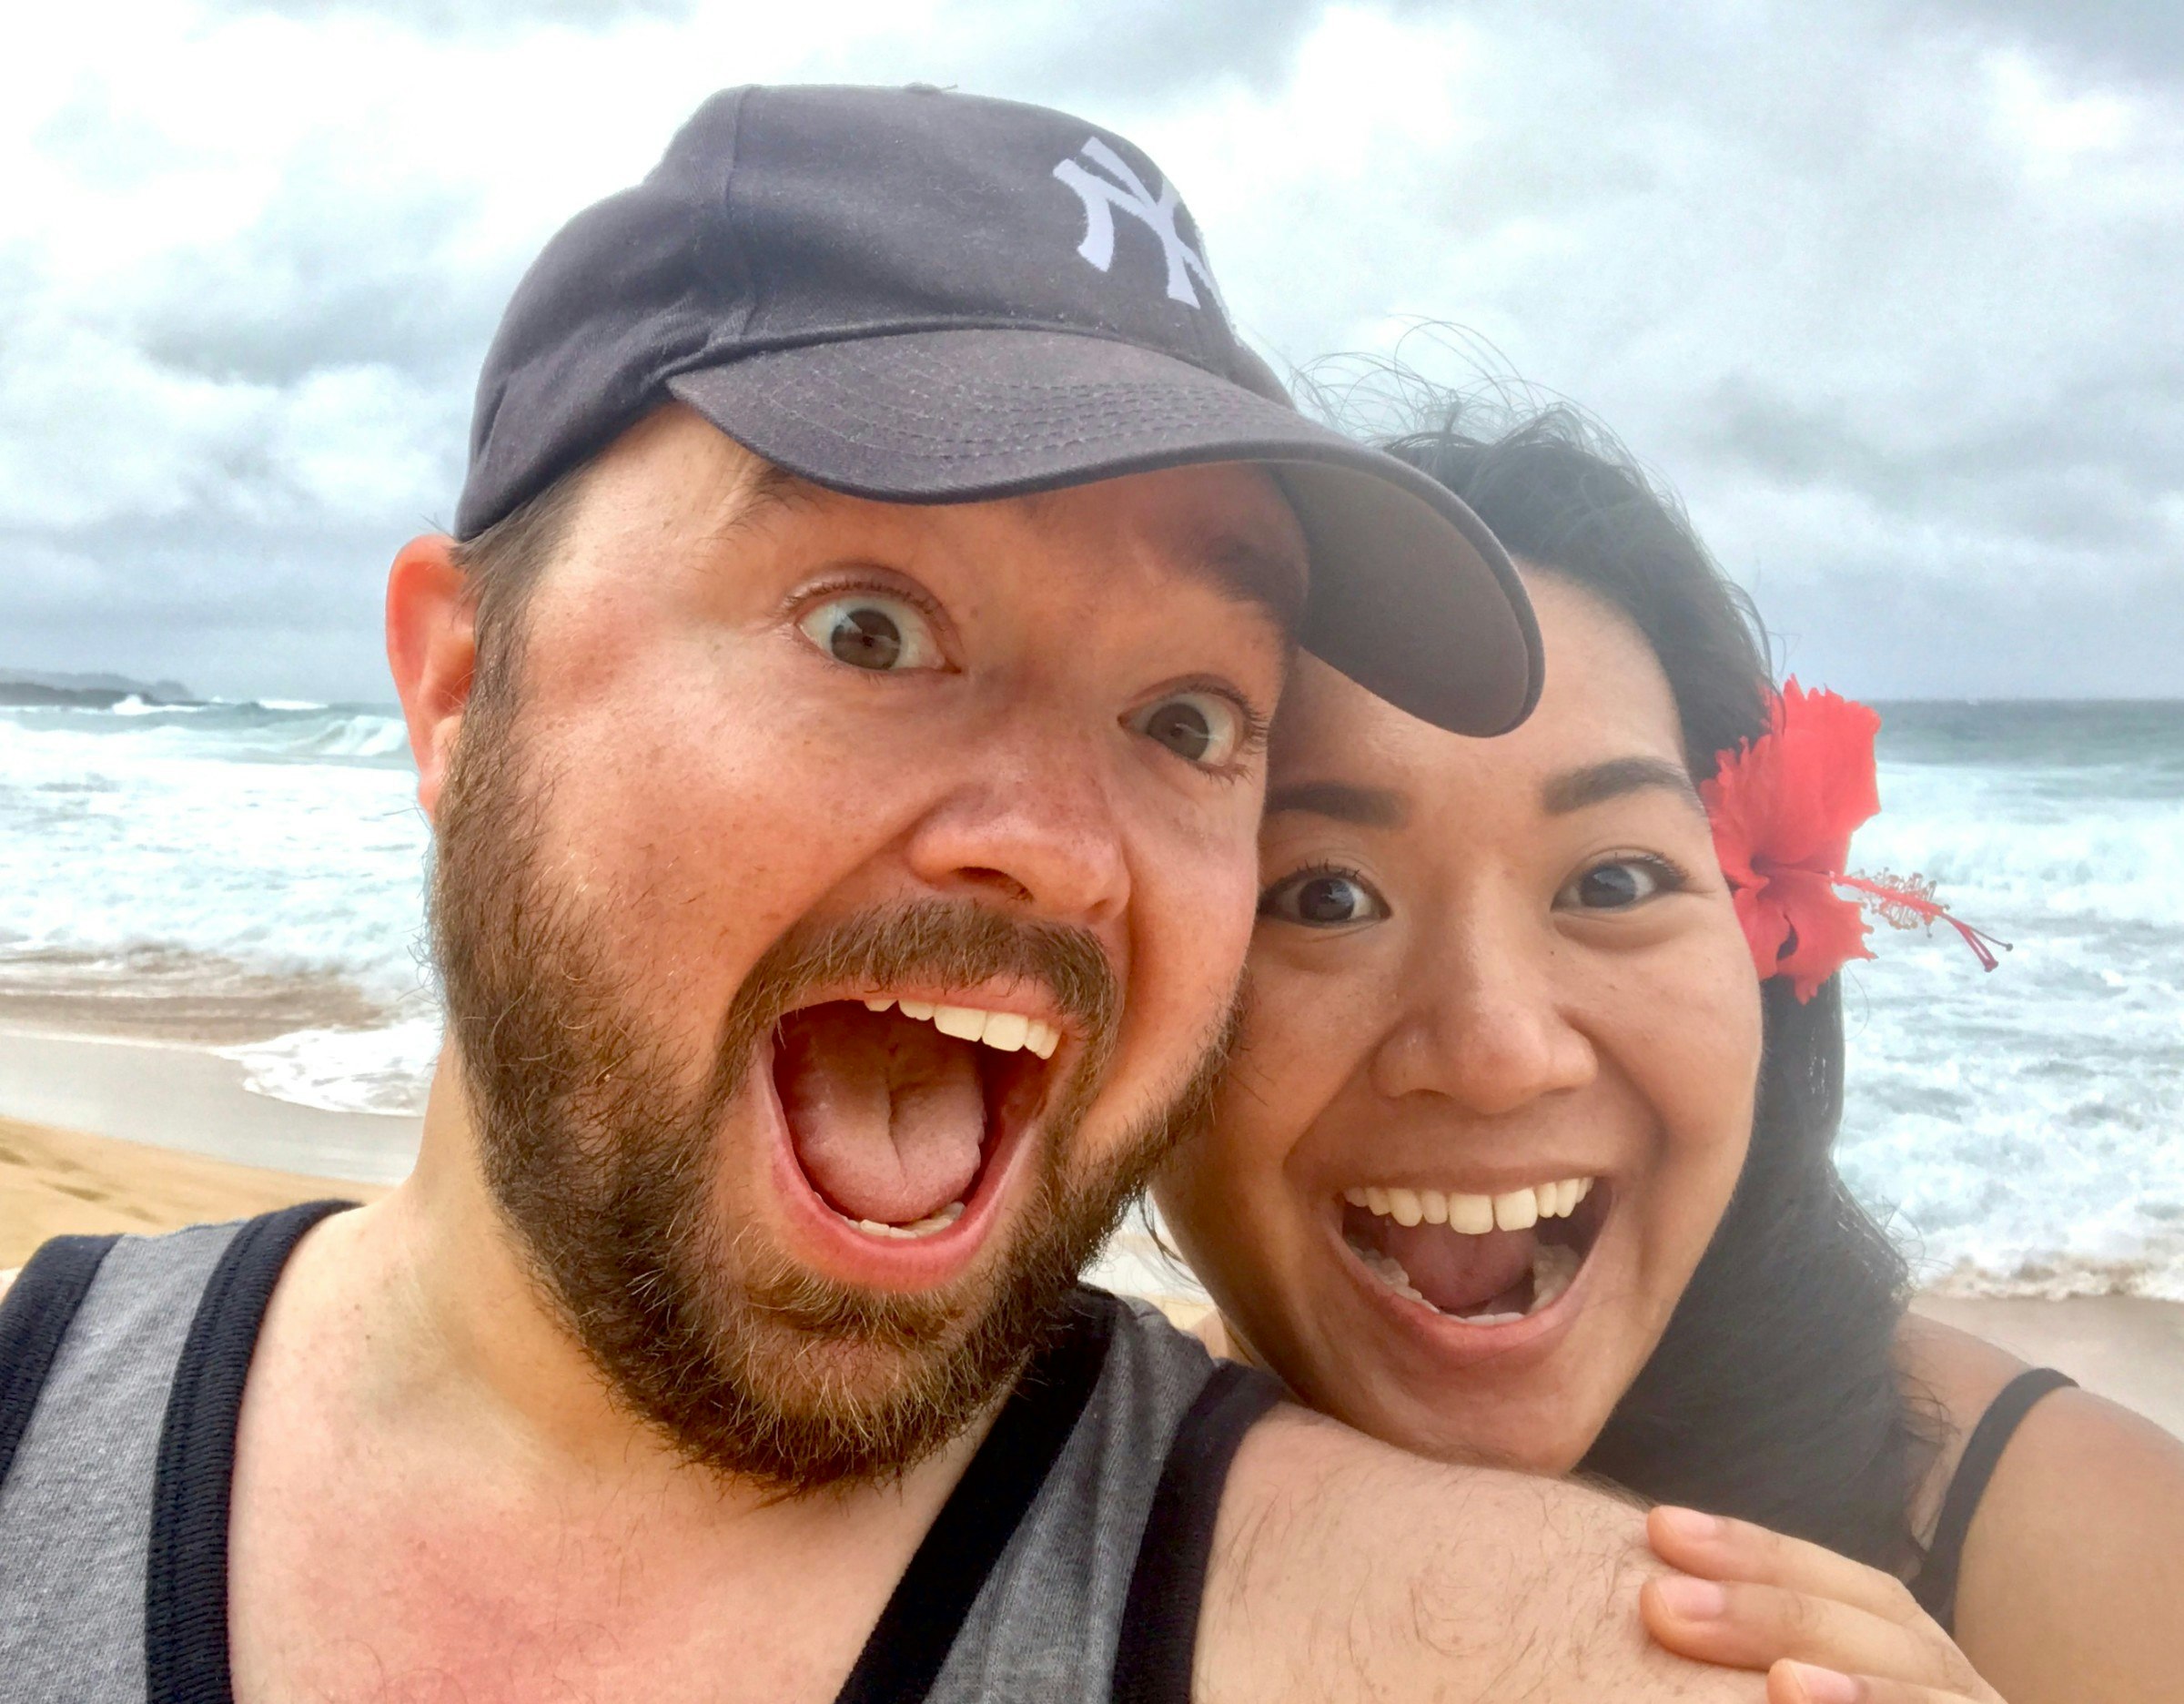 Paddy and Christine pose open-mouthed for a beach selfie.